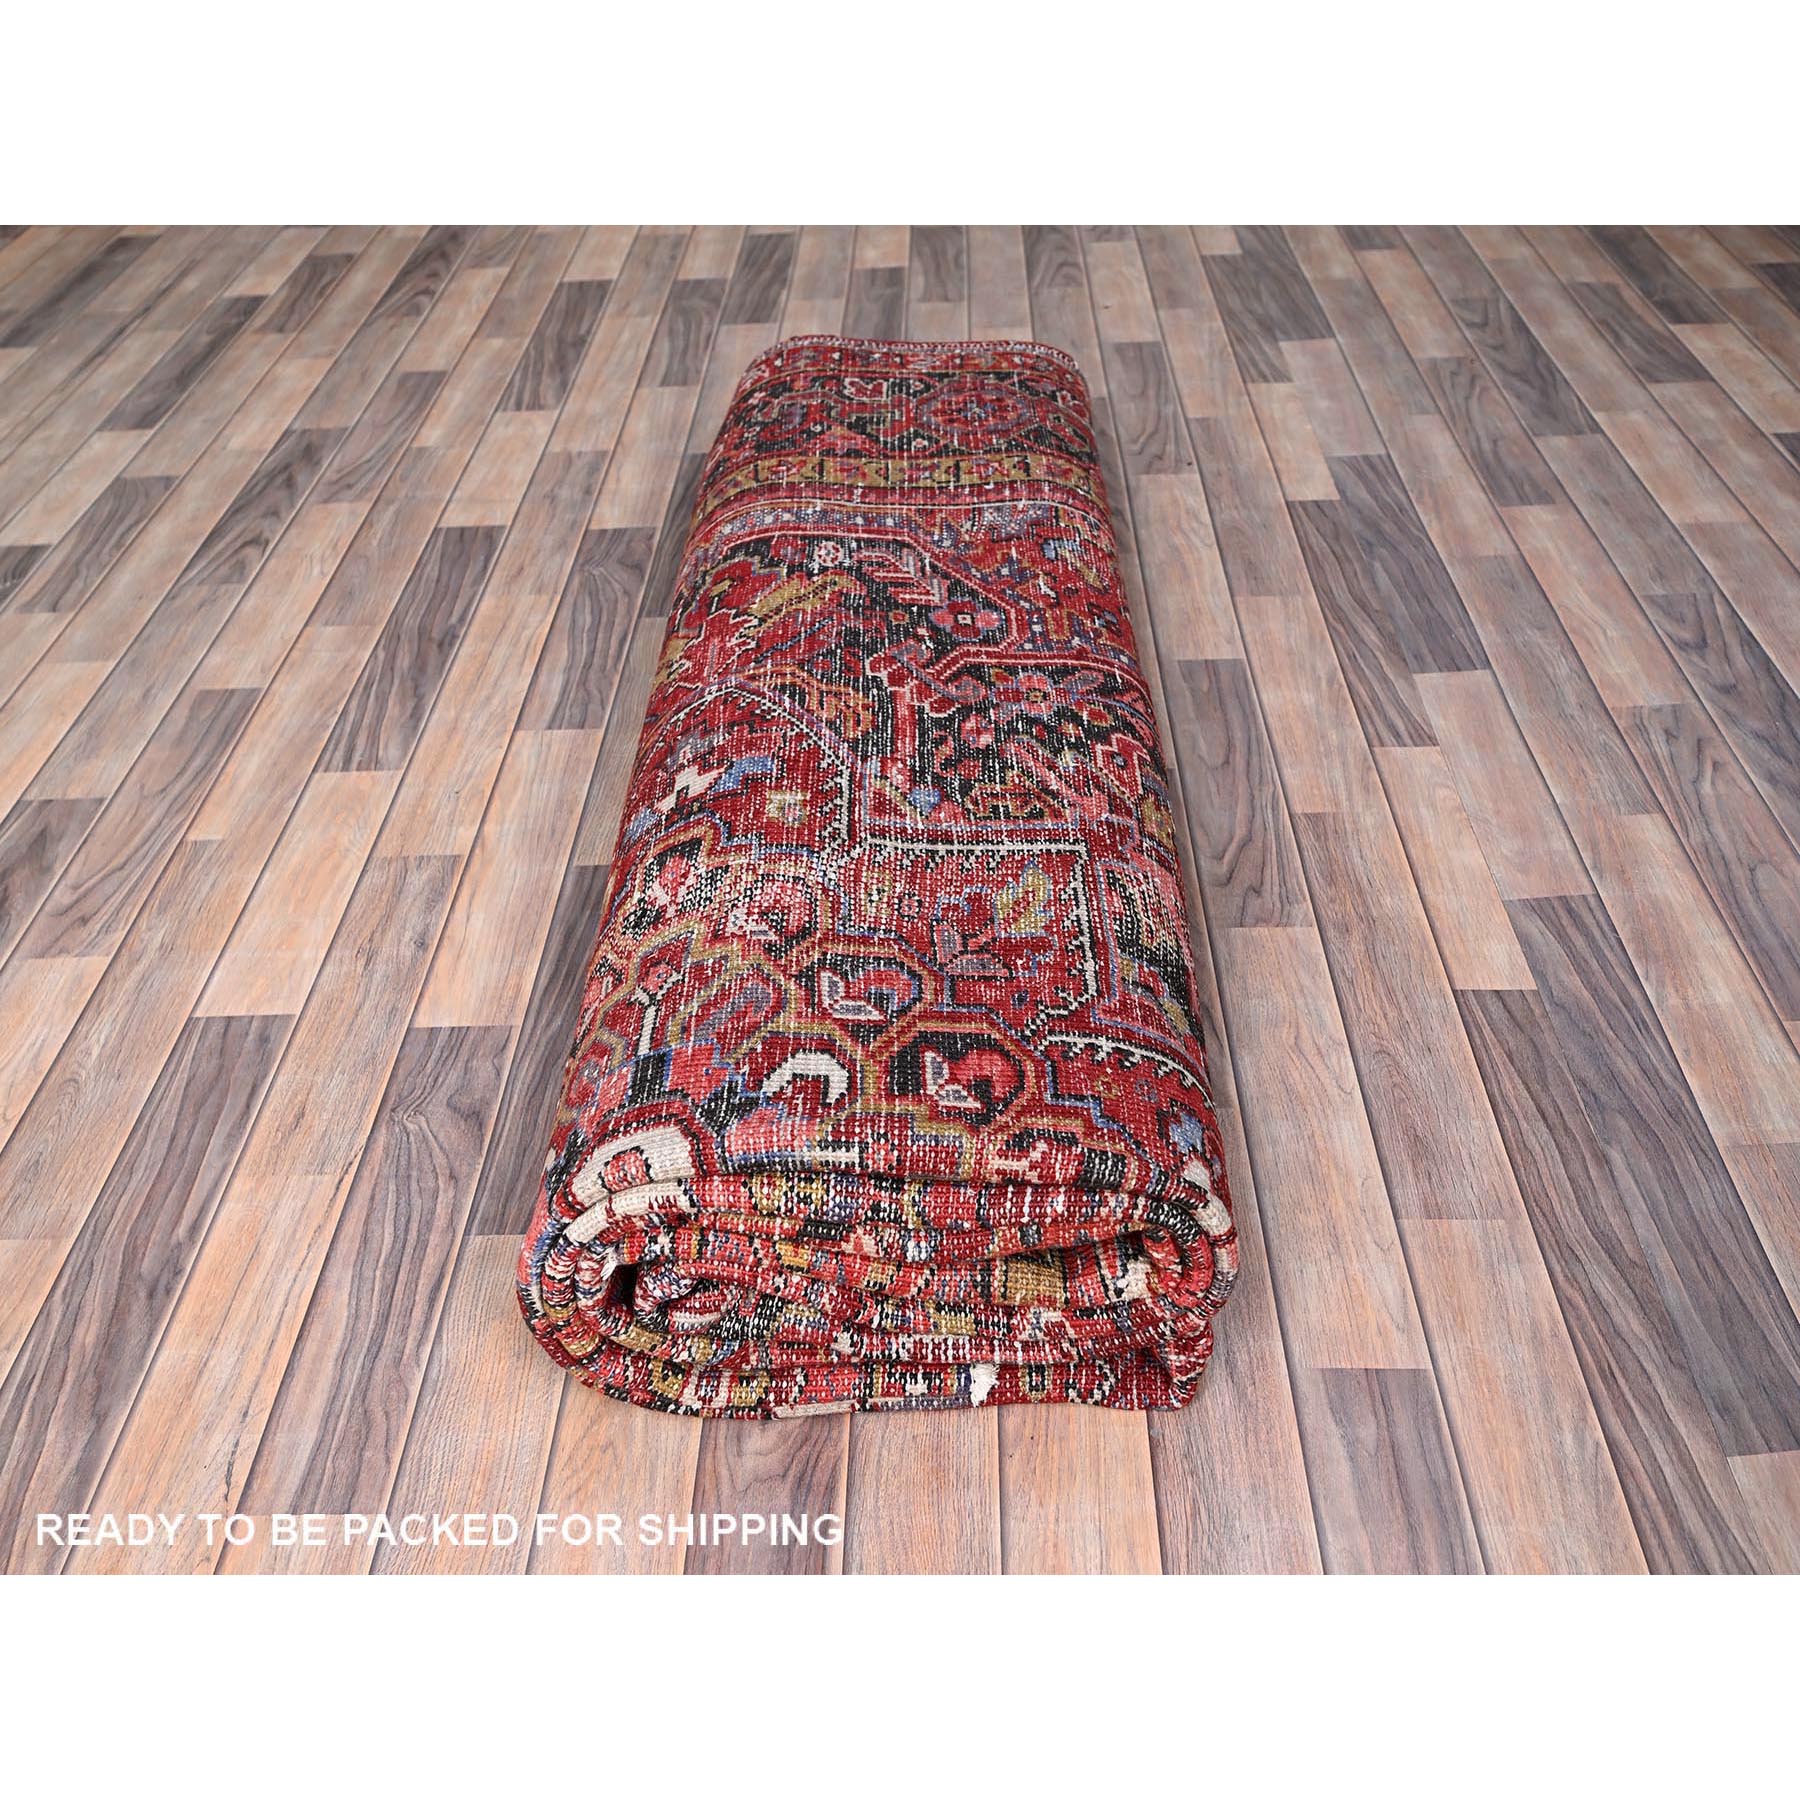 9'8"x13' Carmine Red, Rustic Look, Worn Wool, Hand Woven, Vintage Persian Heriz with Geometric Pattern, Good Condition, Oriental Rug 